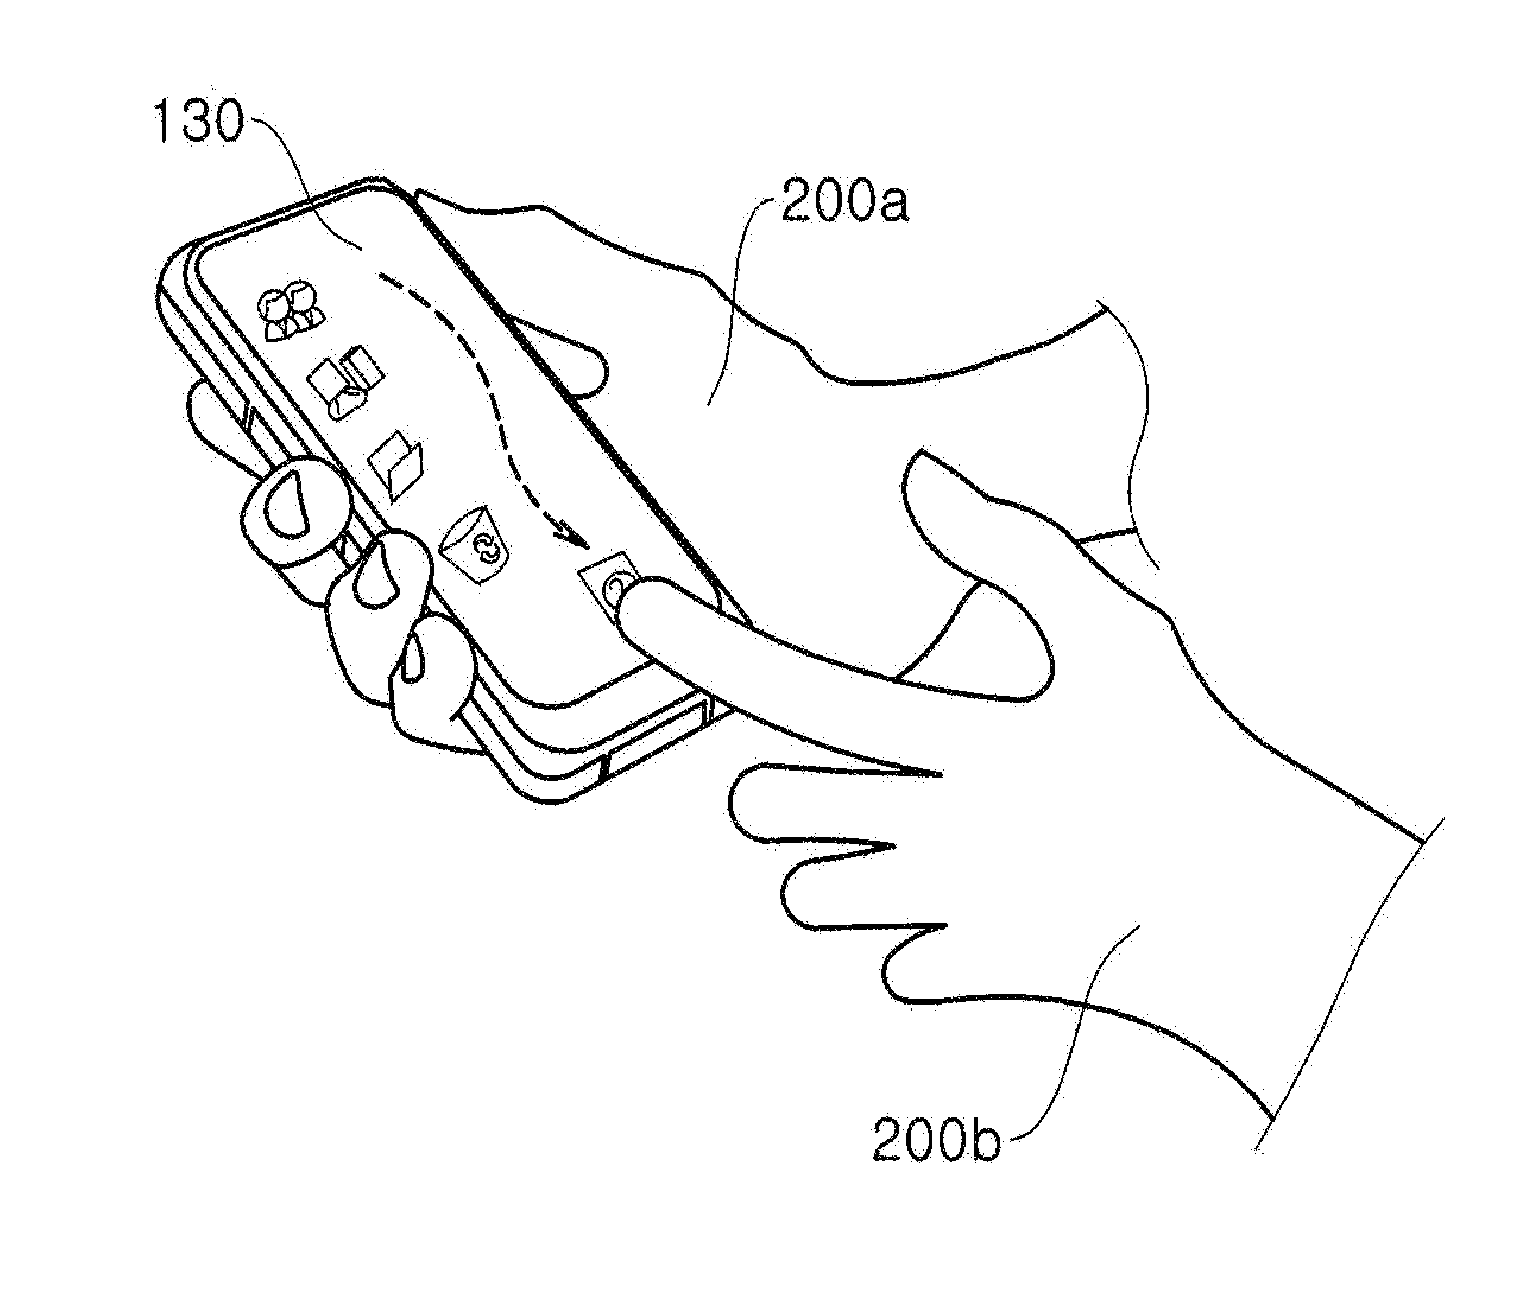 Apparatus and method for vibrotactile mobile device